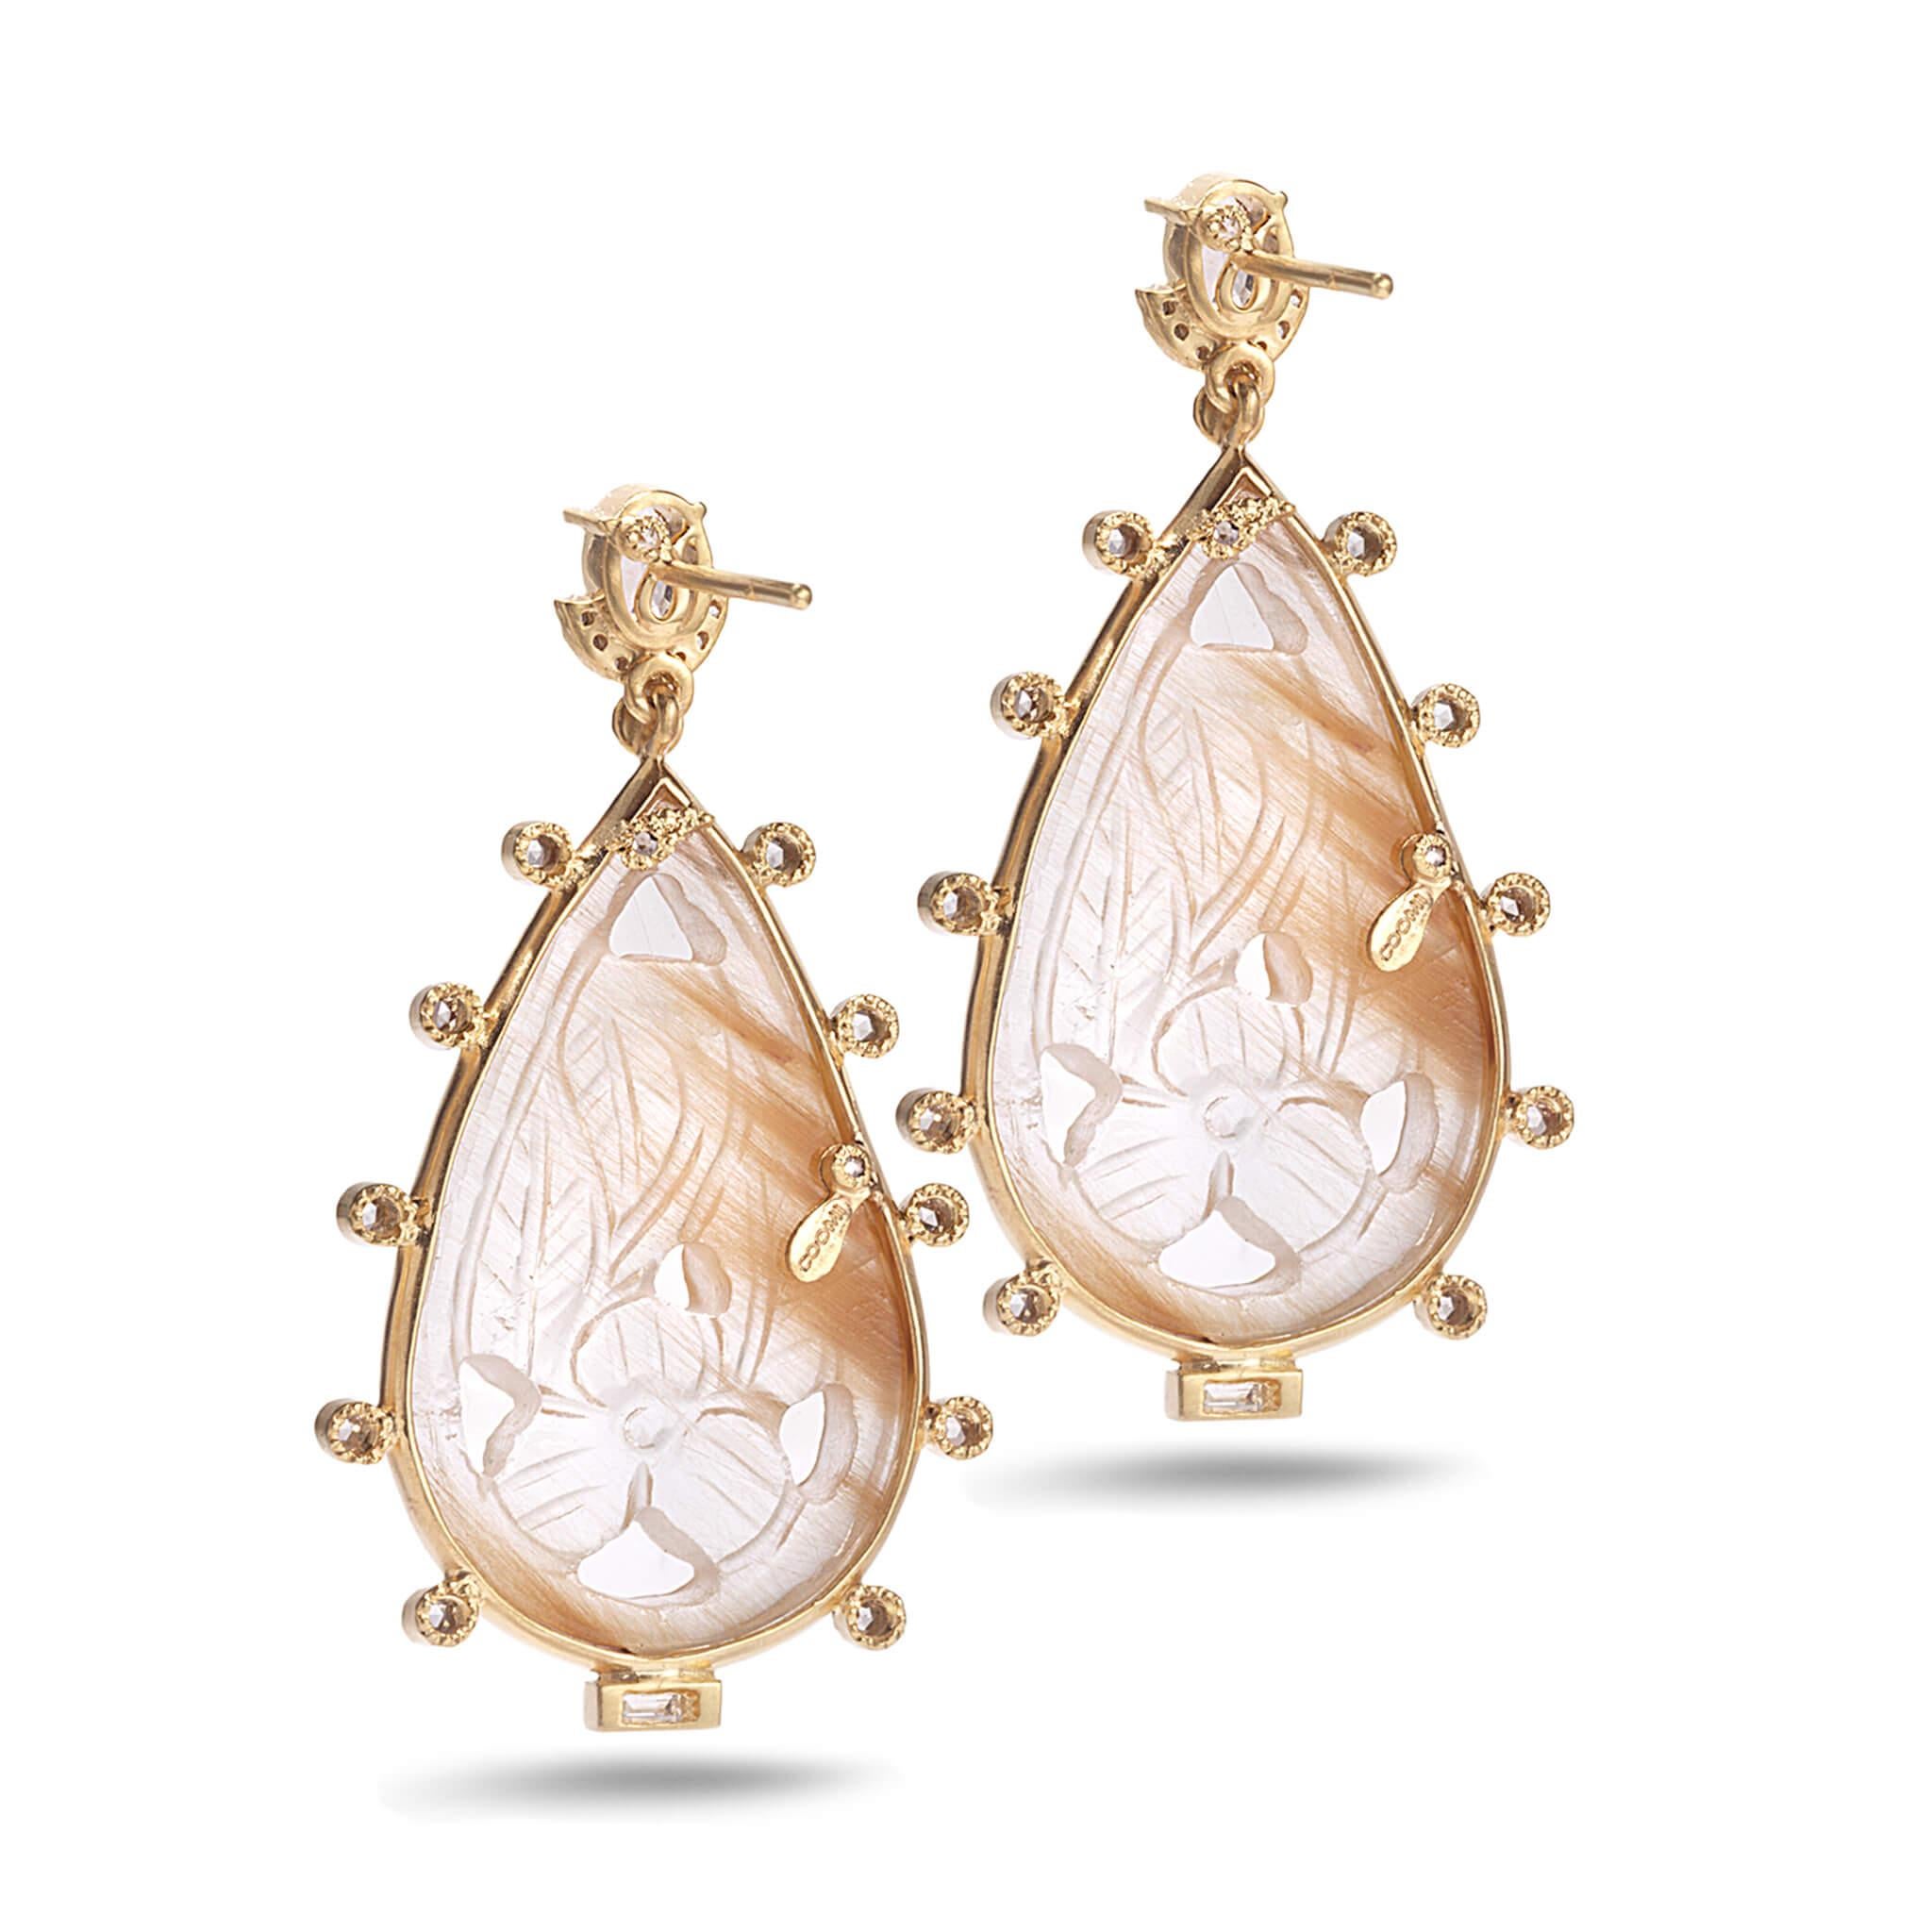 Affinity drop earrings set in 20K yellow gold with 30.07cts hand carbed rutilated quartz, 1.18cts white sapphire, and 0.63cts diamond.
